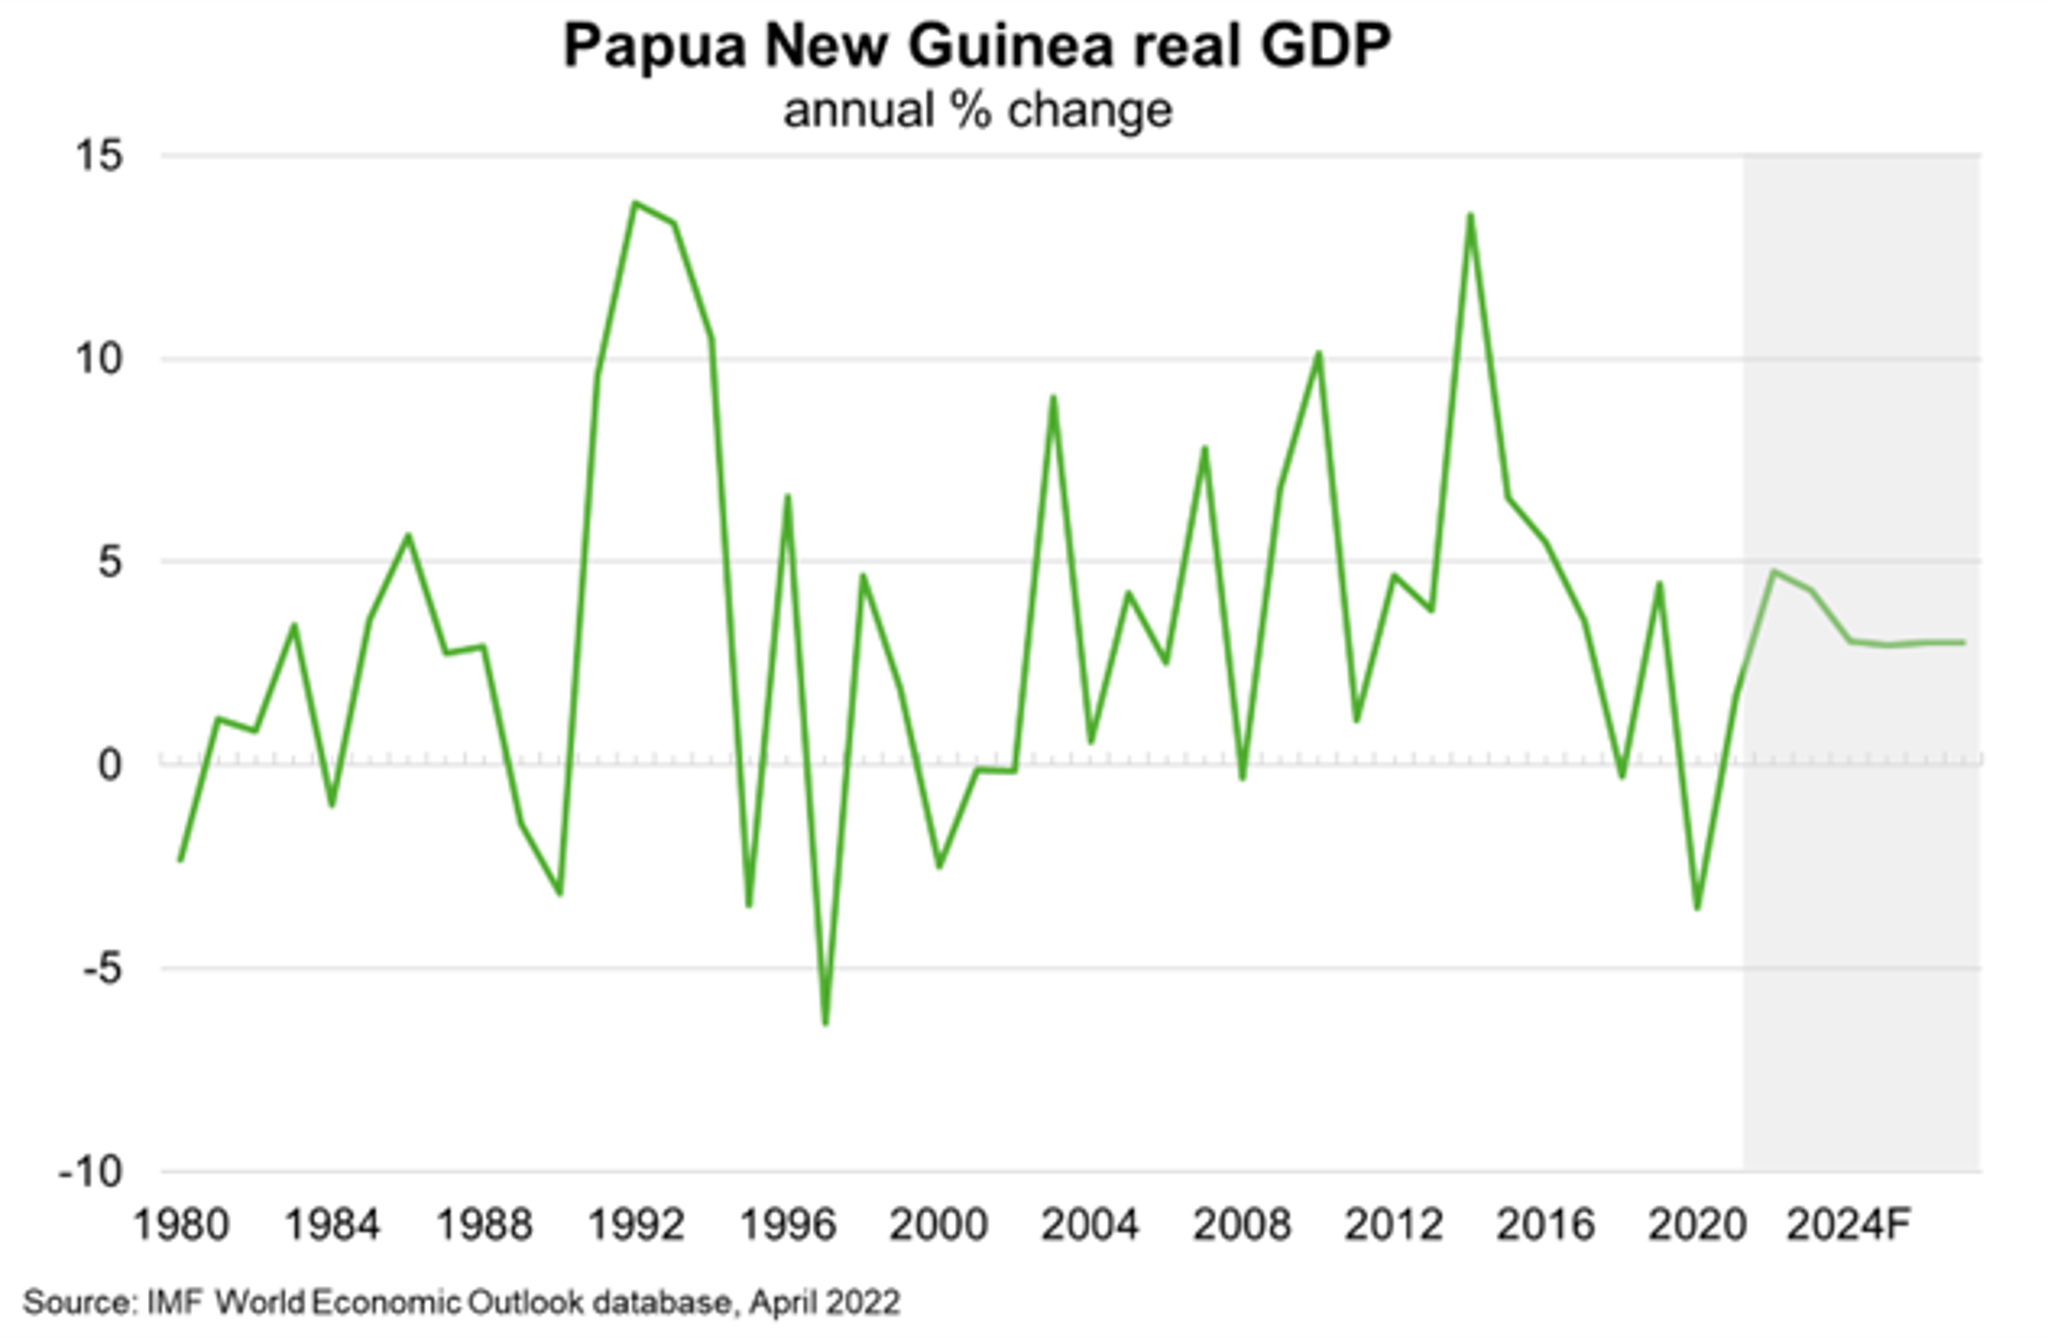 Fig 5 PNG Real GDP